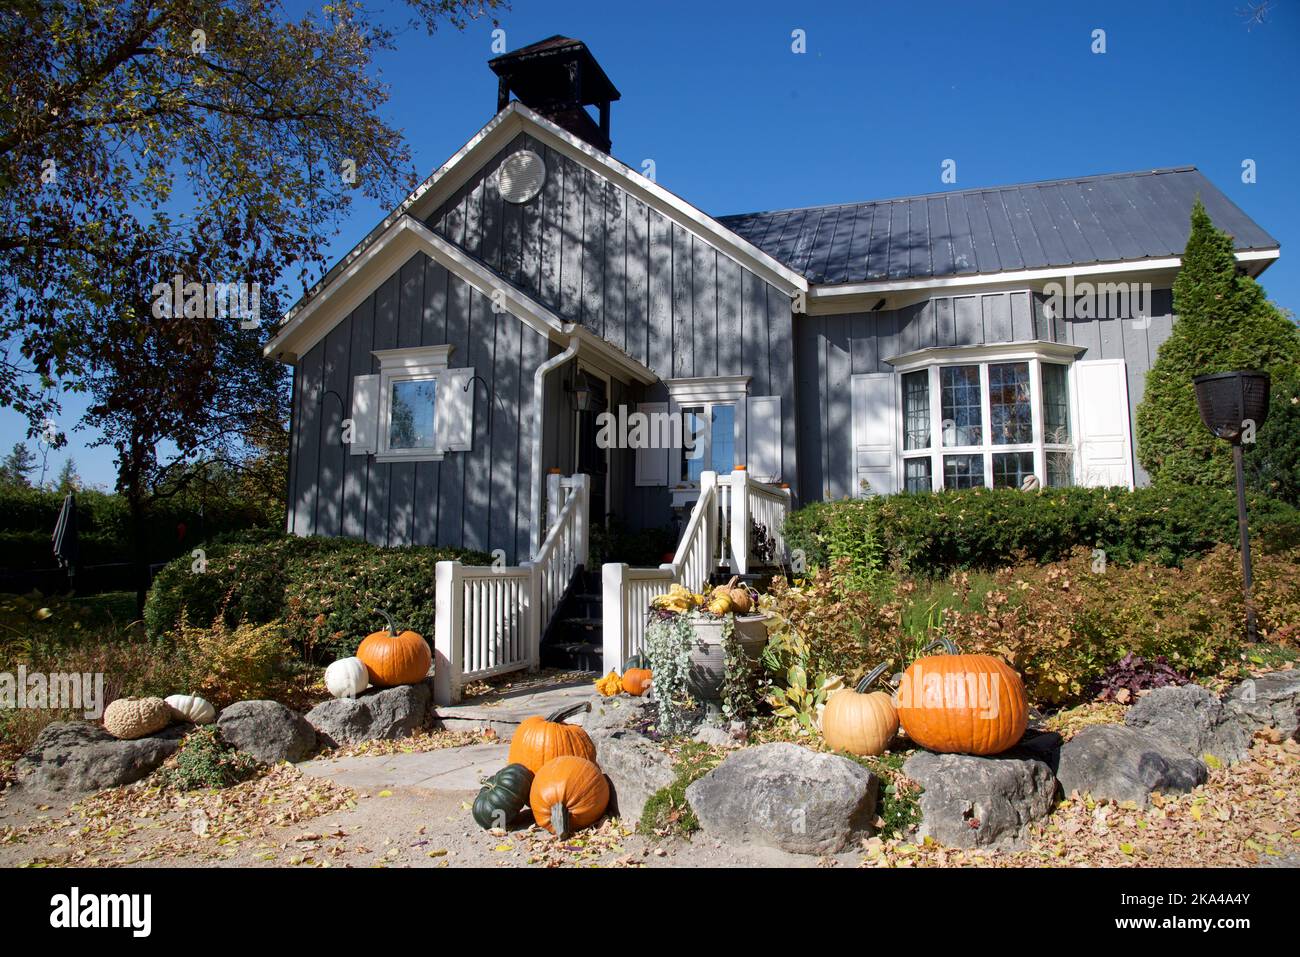 Halloween decoration with pumpkins on a Victorian-style house Stock Photo